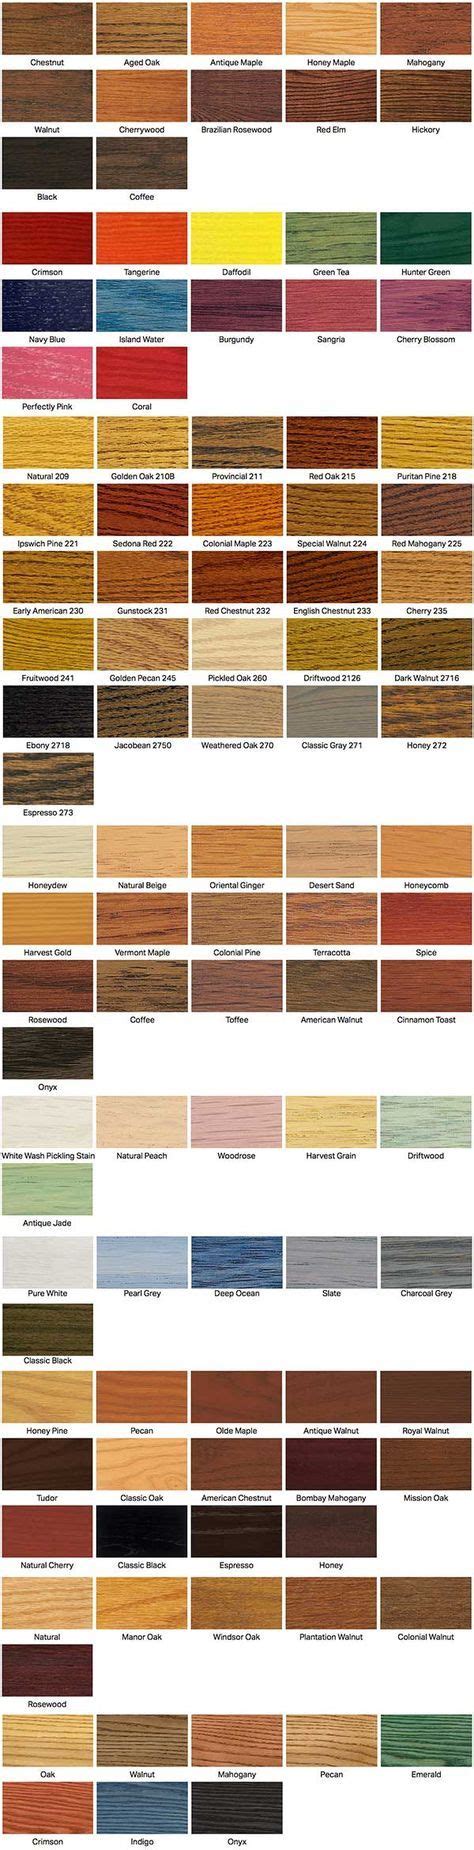 Wood Floor Stain Colors From Minwax By Indianapolis Hardwood Floor